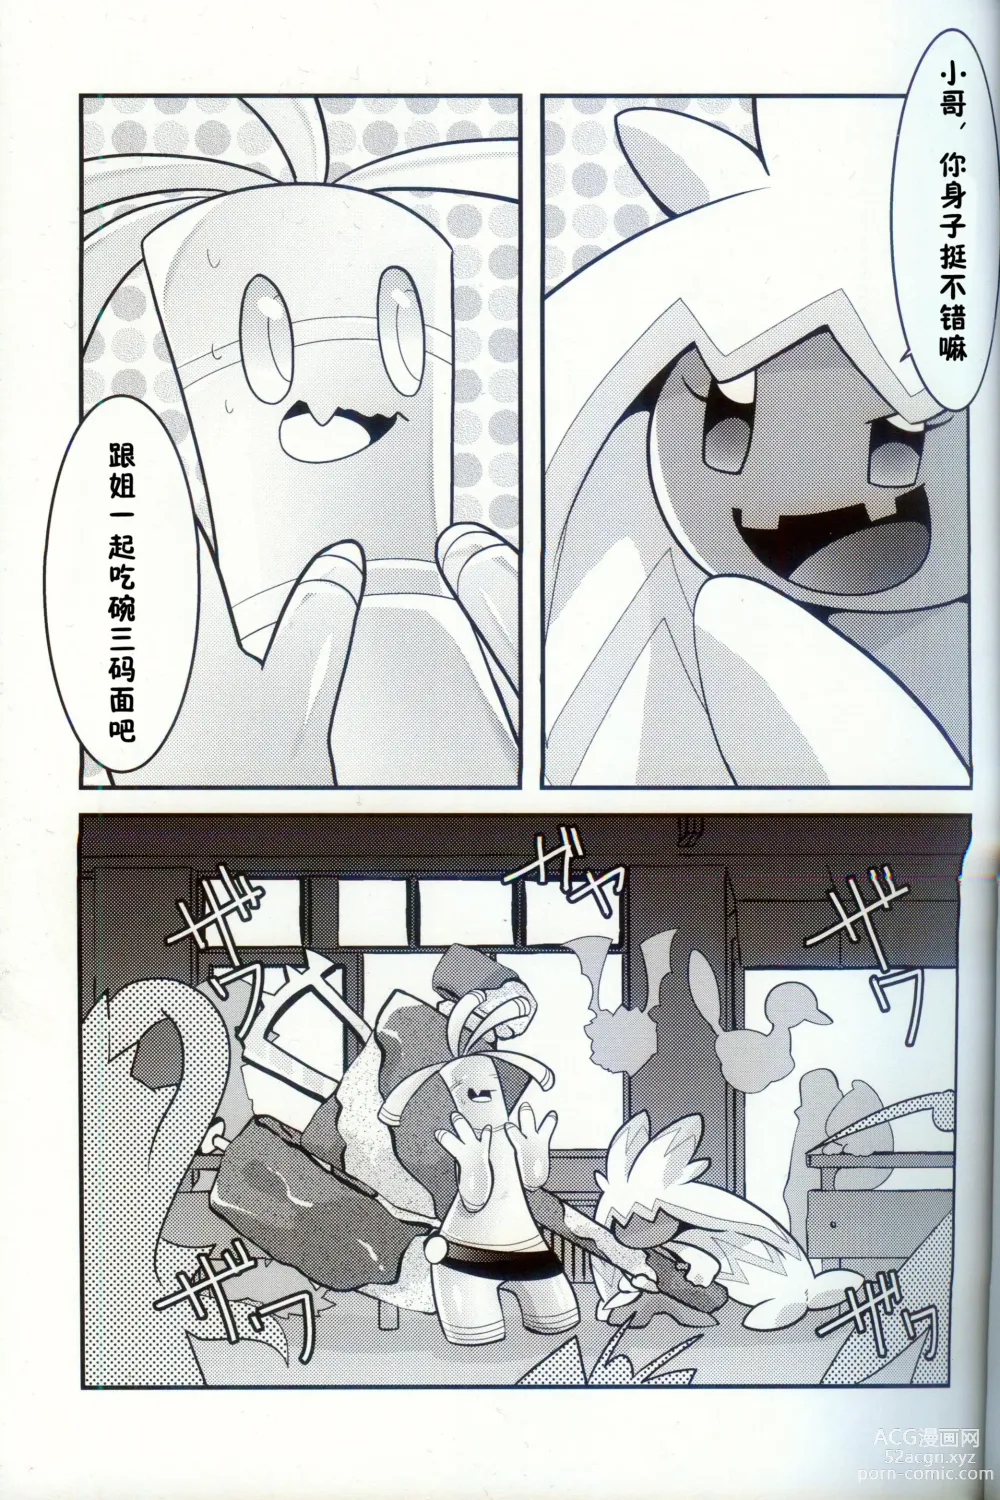 Page 4 of doujinshi 横滨的塞富豪巨锻匠